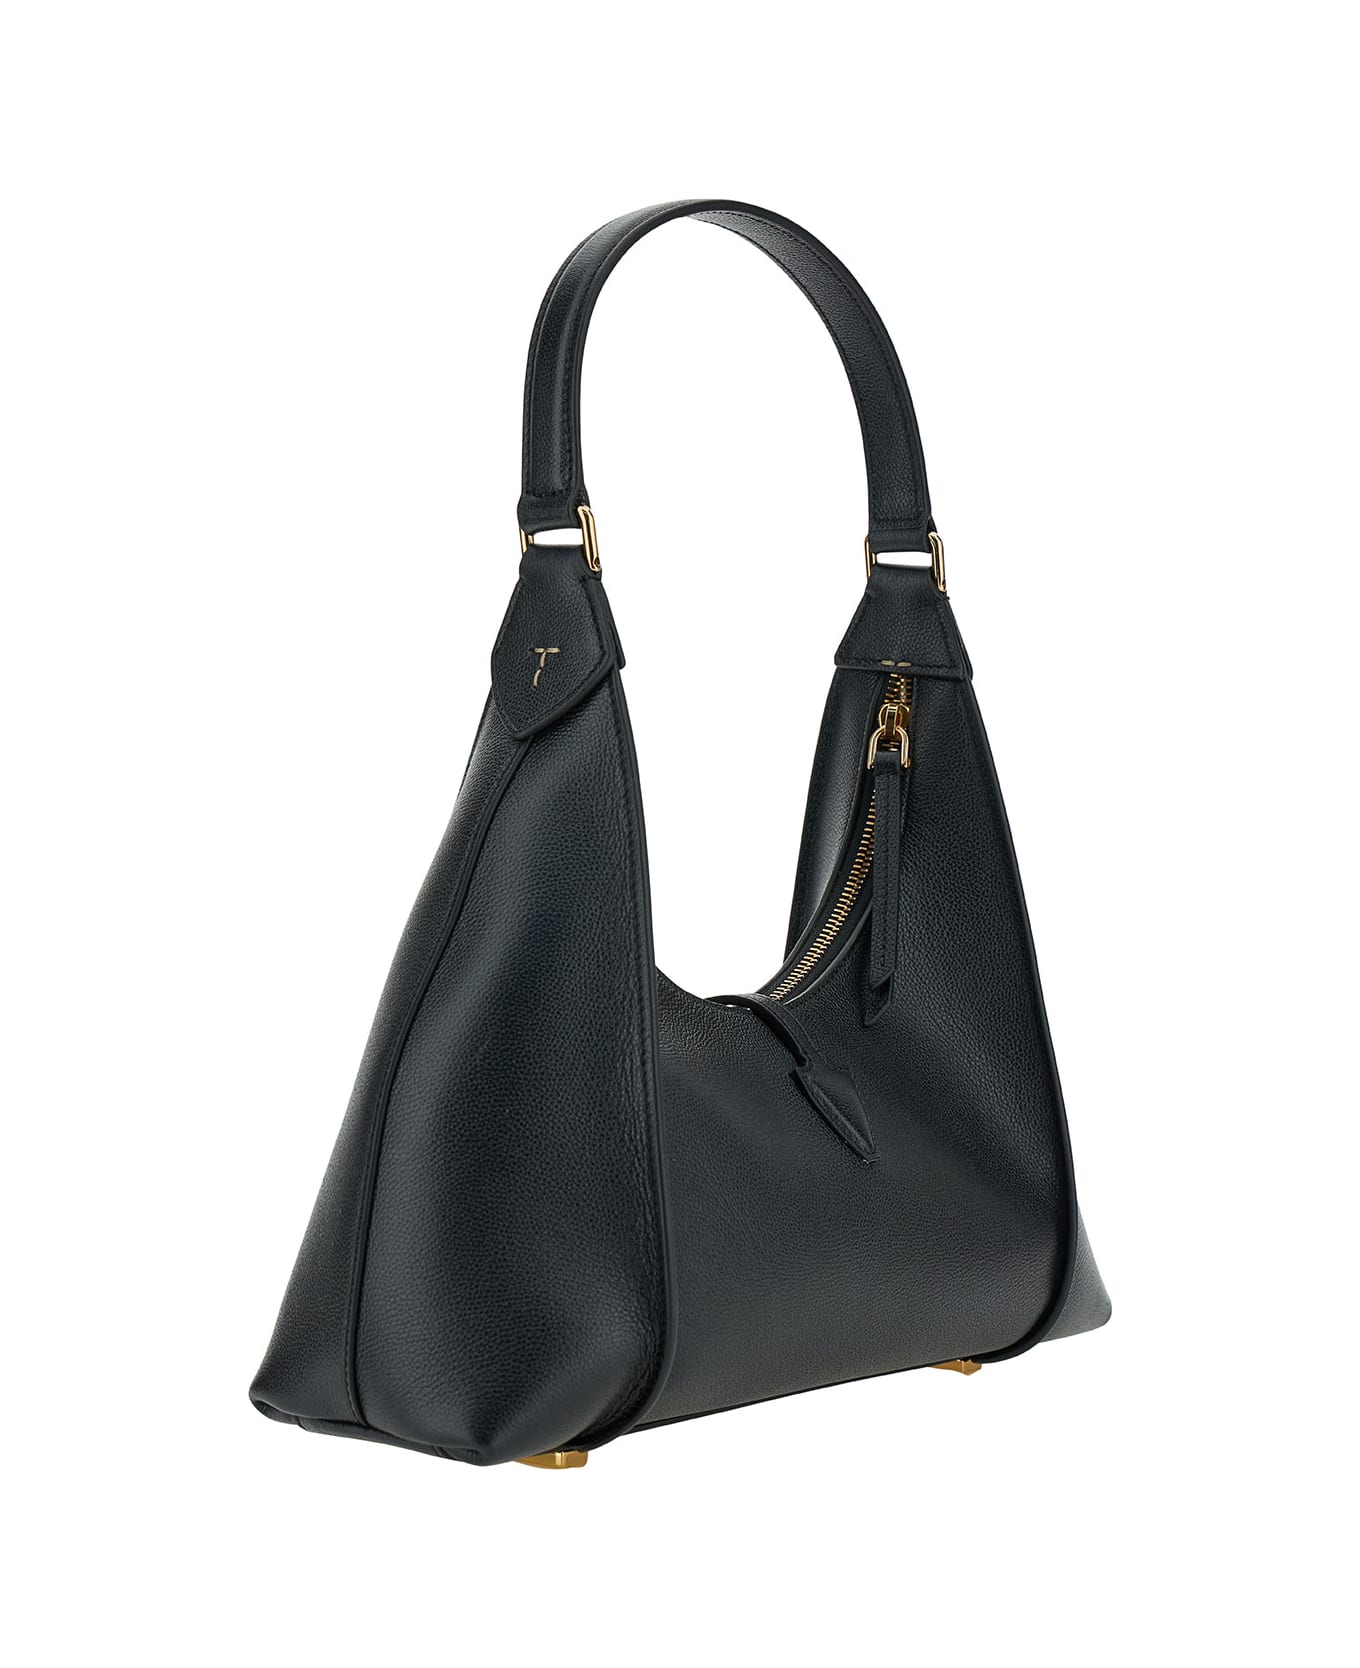 Tod's Black Shoulder Bag With T Timeless Charm In Leather Woman - Black トートバッグ